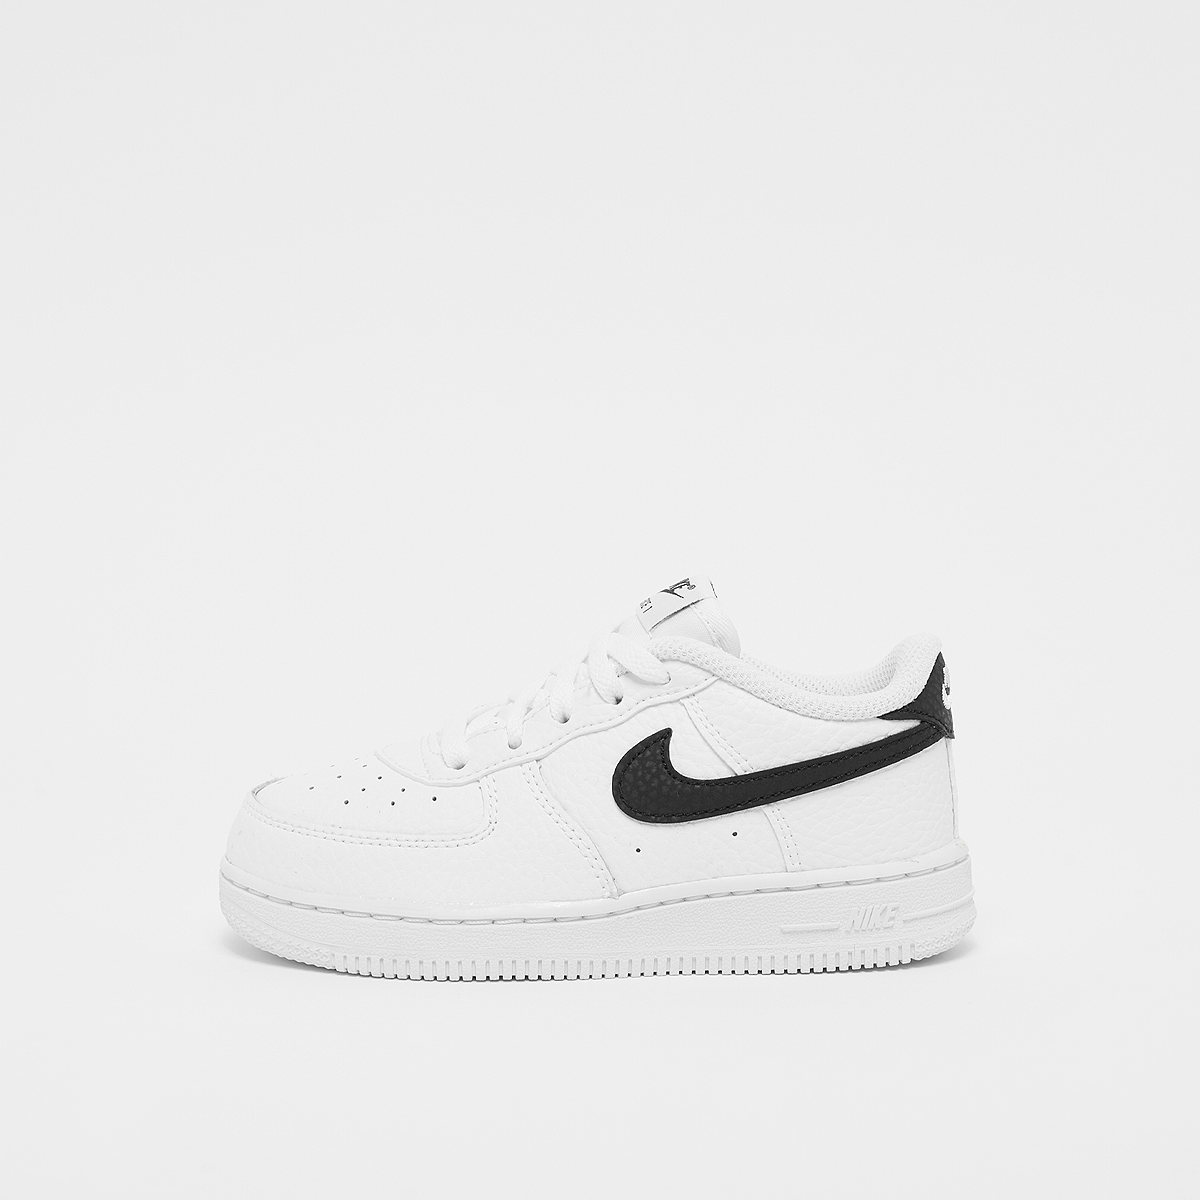 NIKE AIR FORCE 1 - Snipes